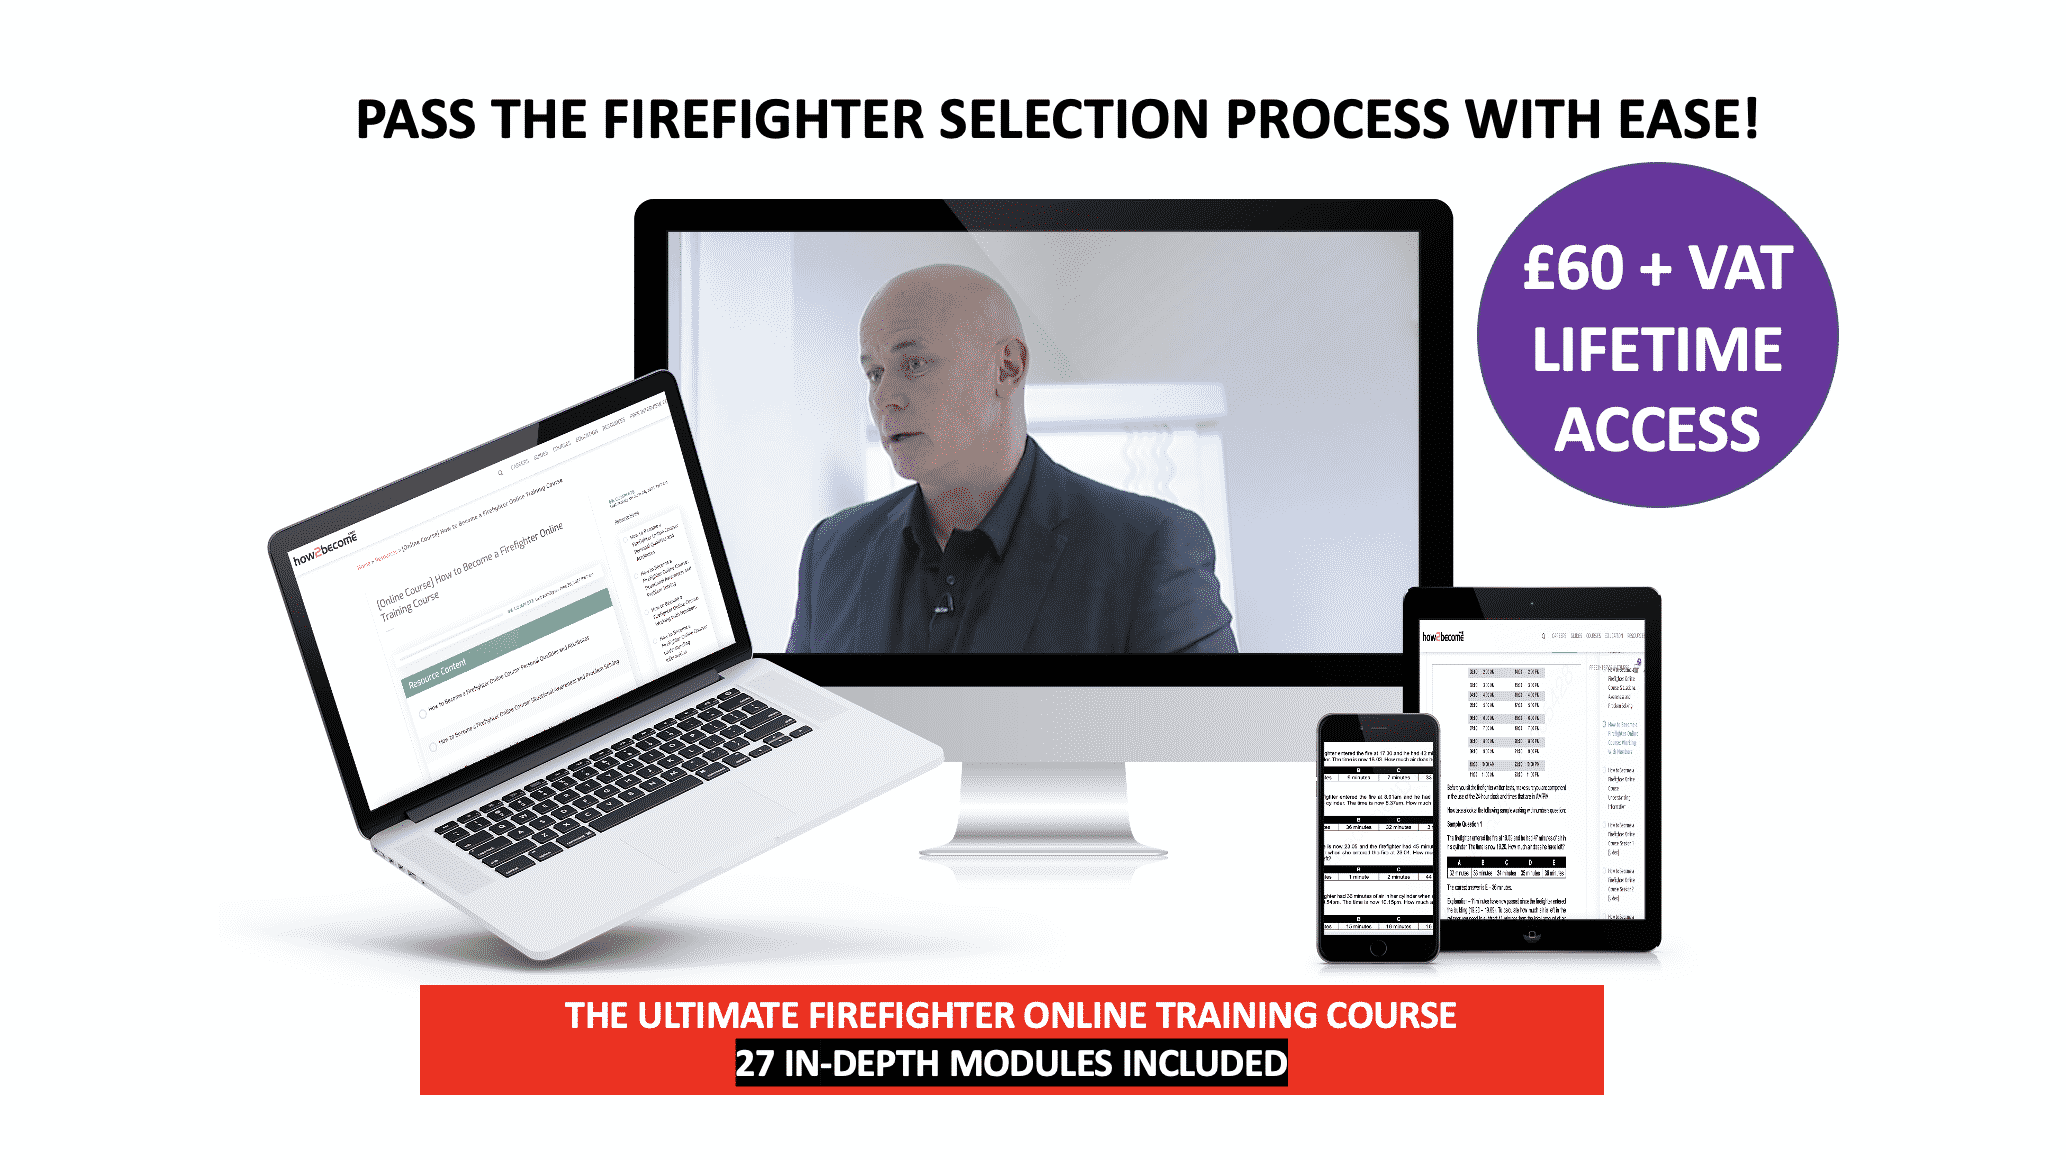 Online firefighter training course lifetime access